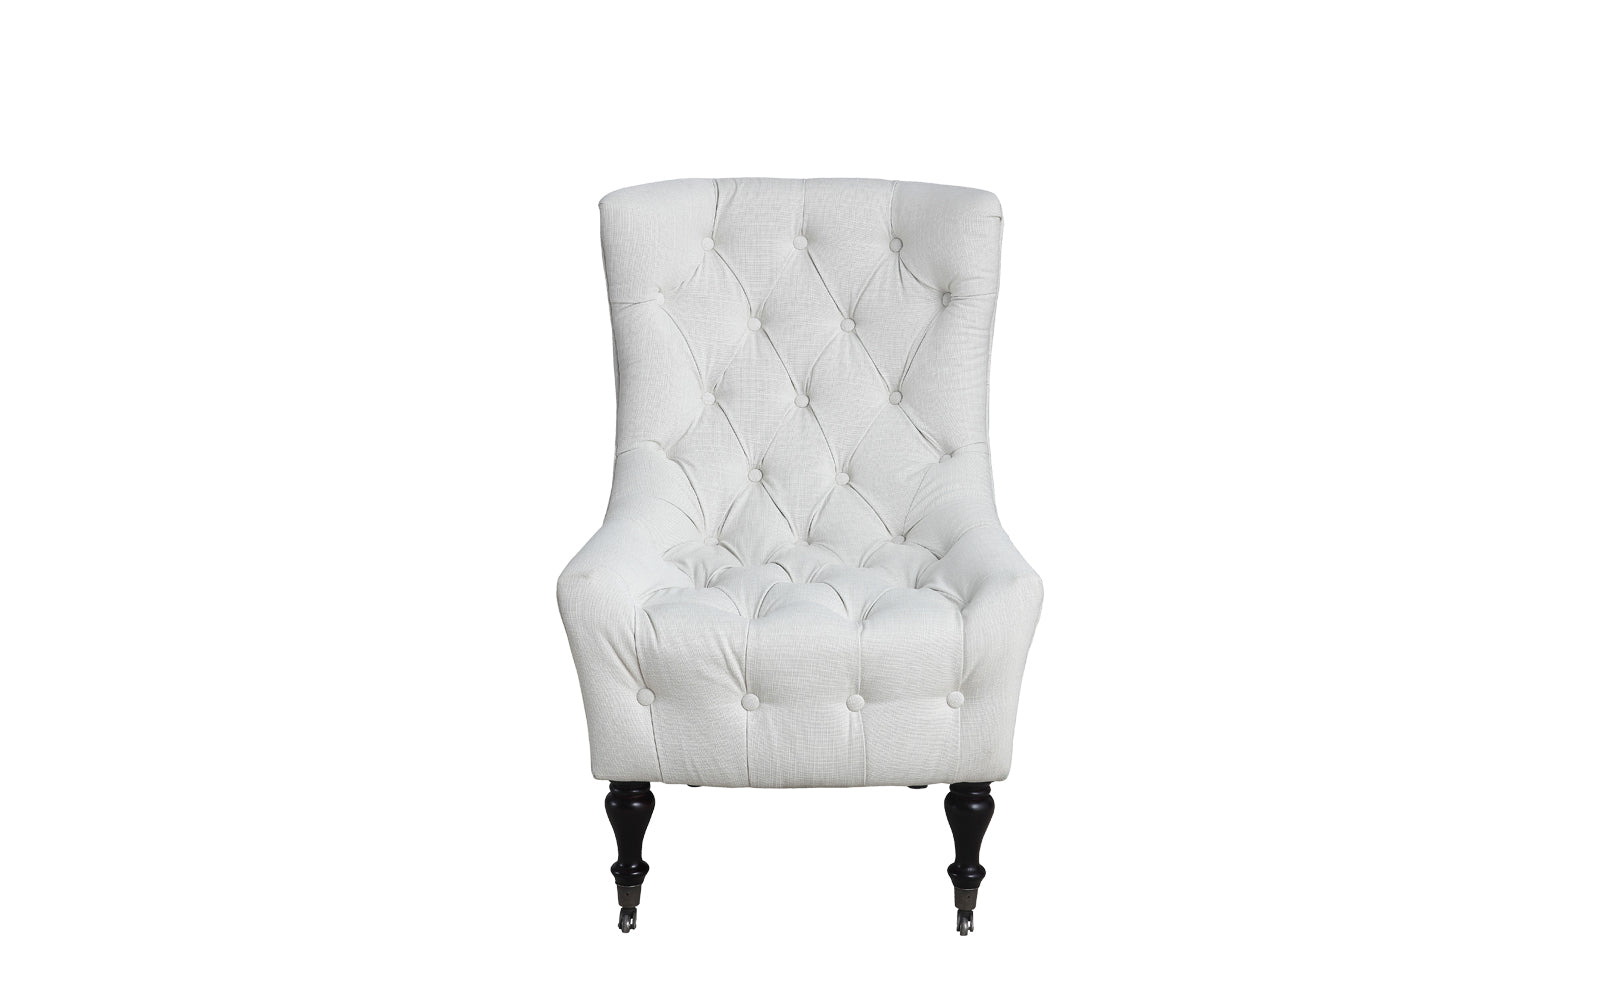 Ennio Classic Tufted Linen Armchair with Casters